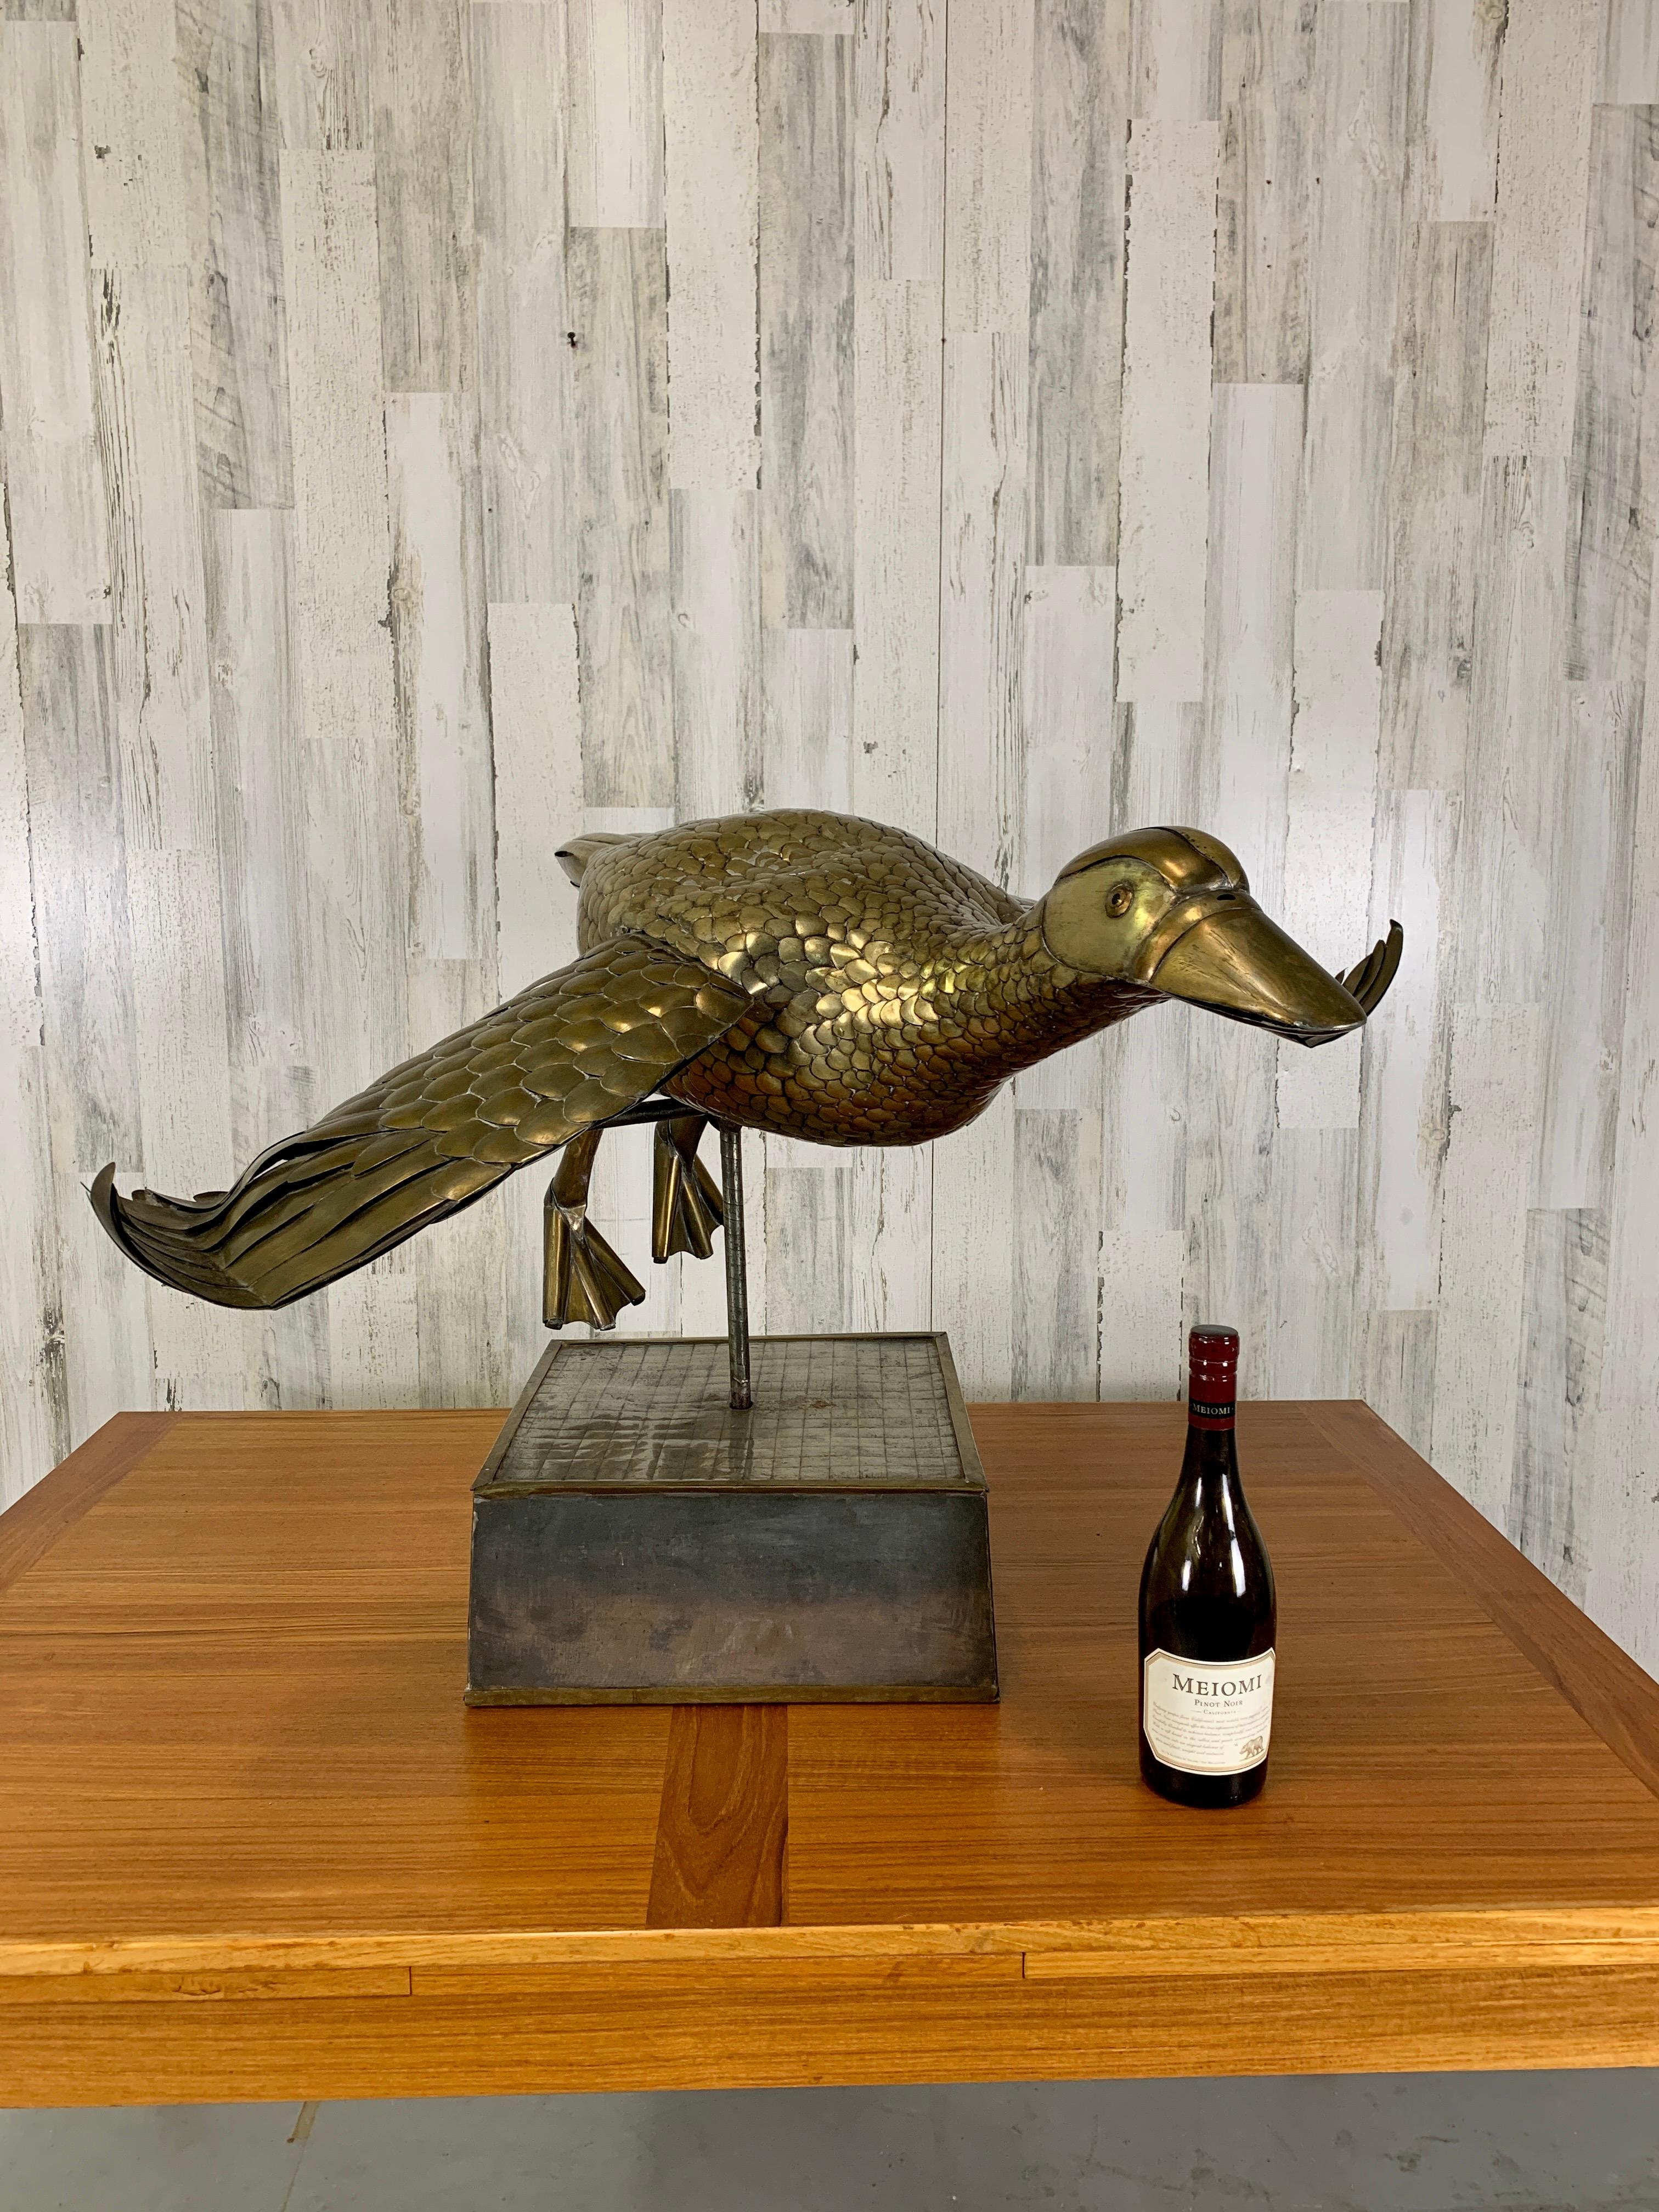 Mexican Limited Edition 2/100 Sergio Bustamante Flying Duck Sculpture